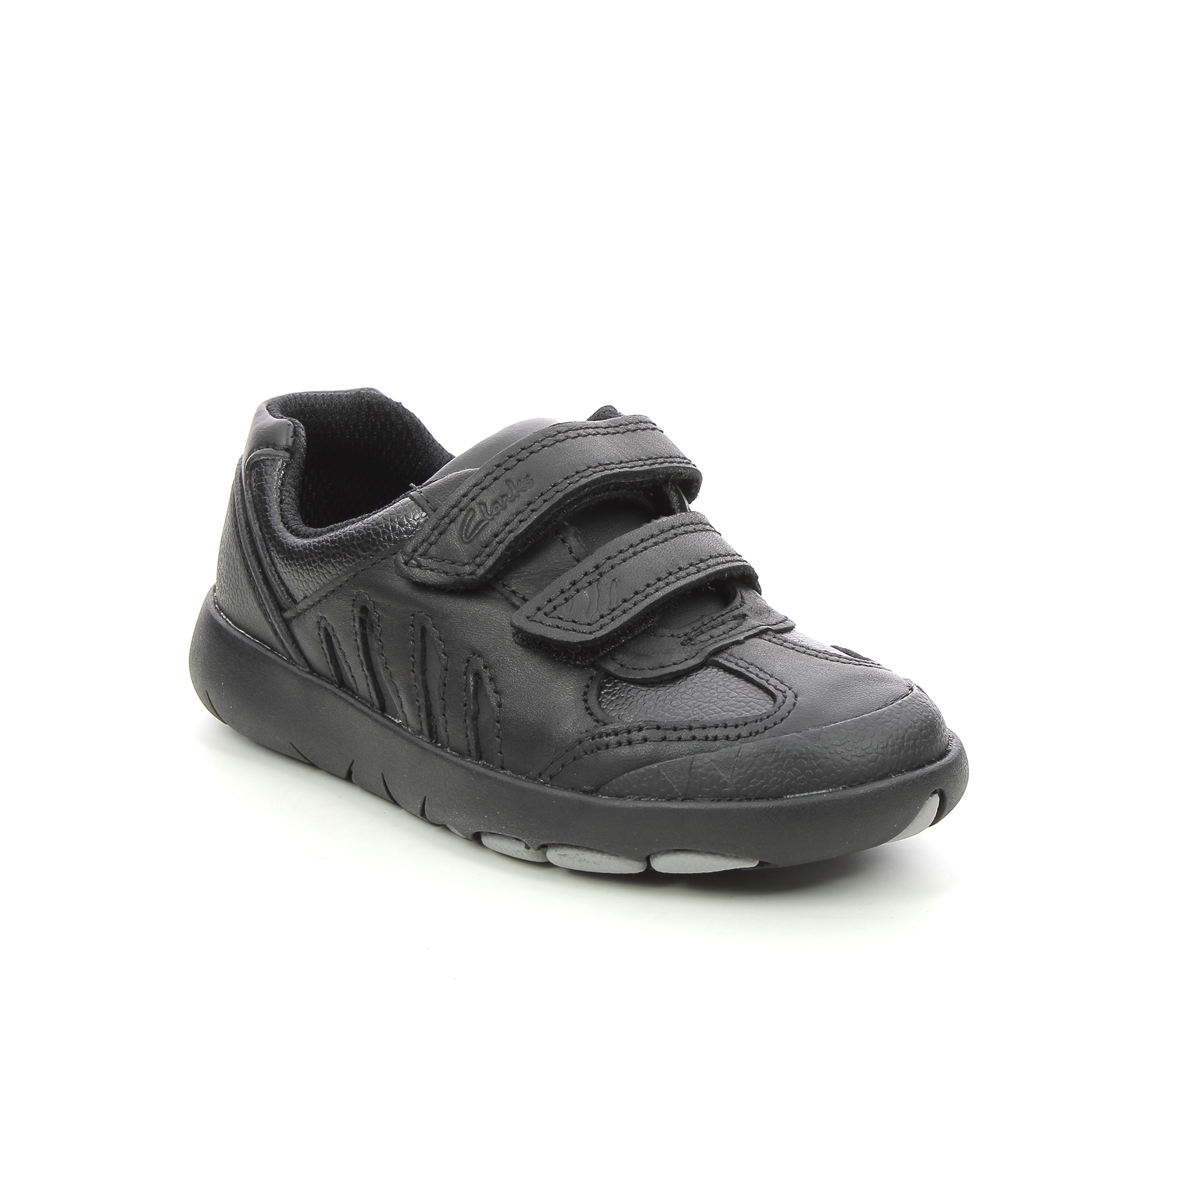 Clarks Rex Stride T Black Leather Kids Boys Casual Shoes 614397G In Size 8.5 In Plain Black Leather G Width Fitting For School For kids